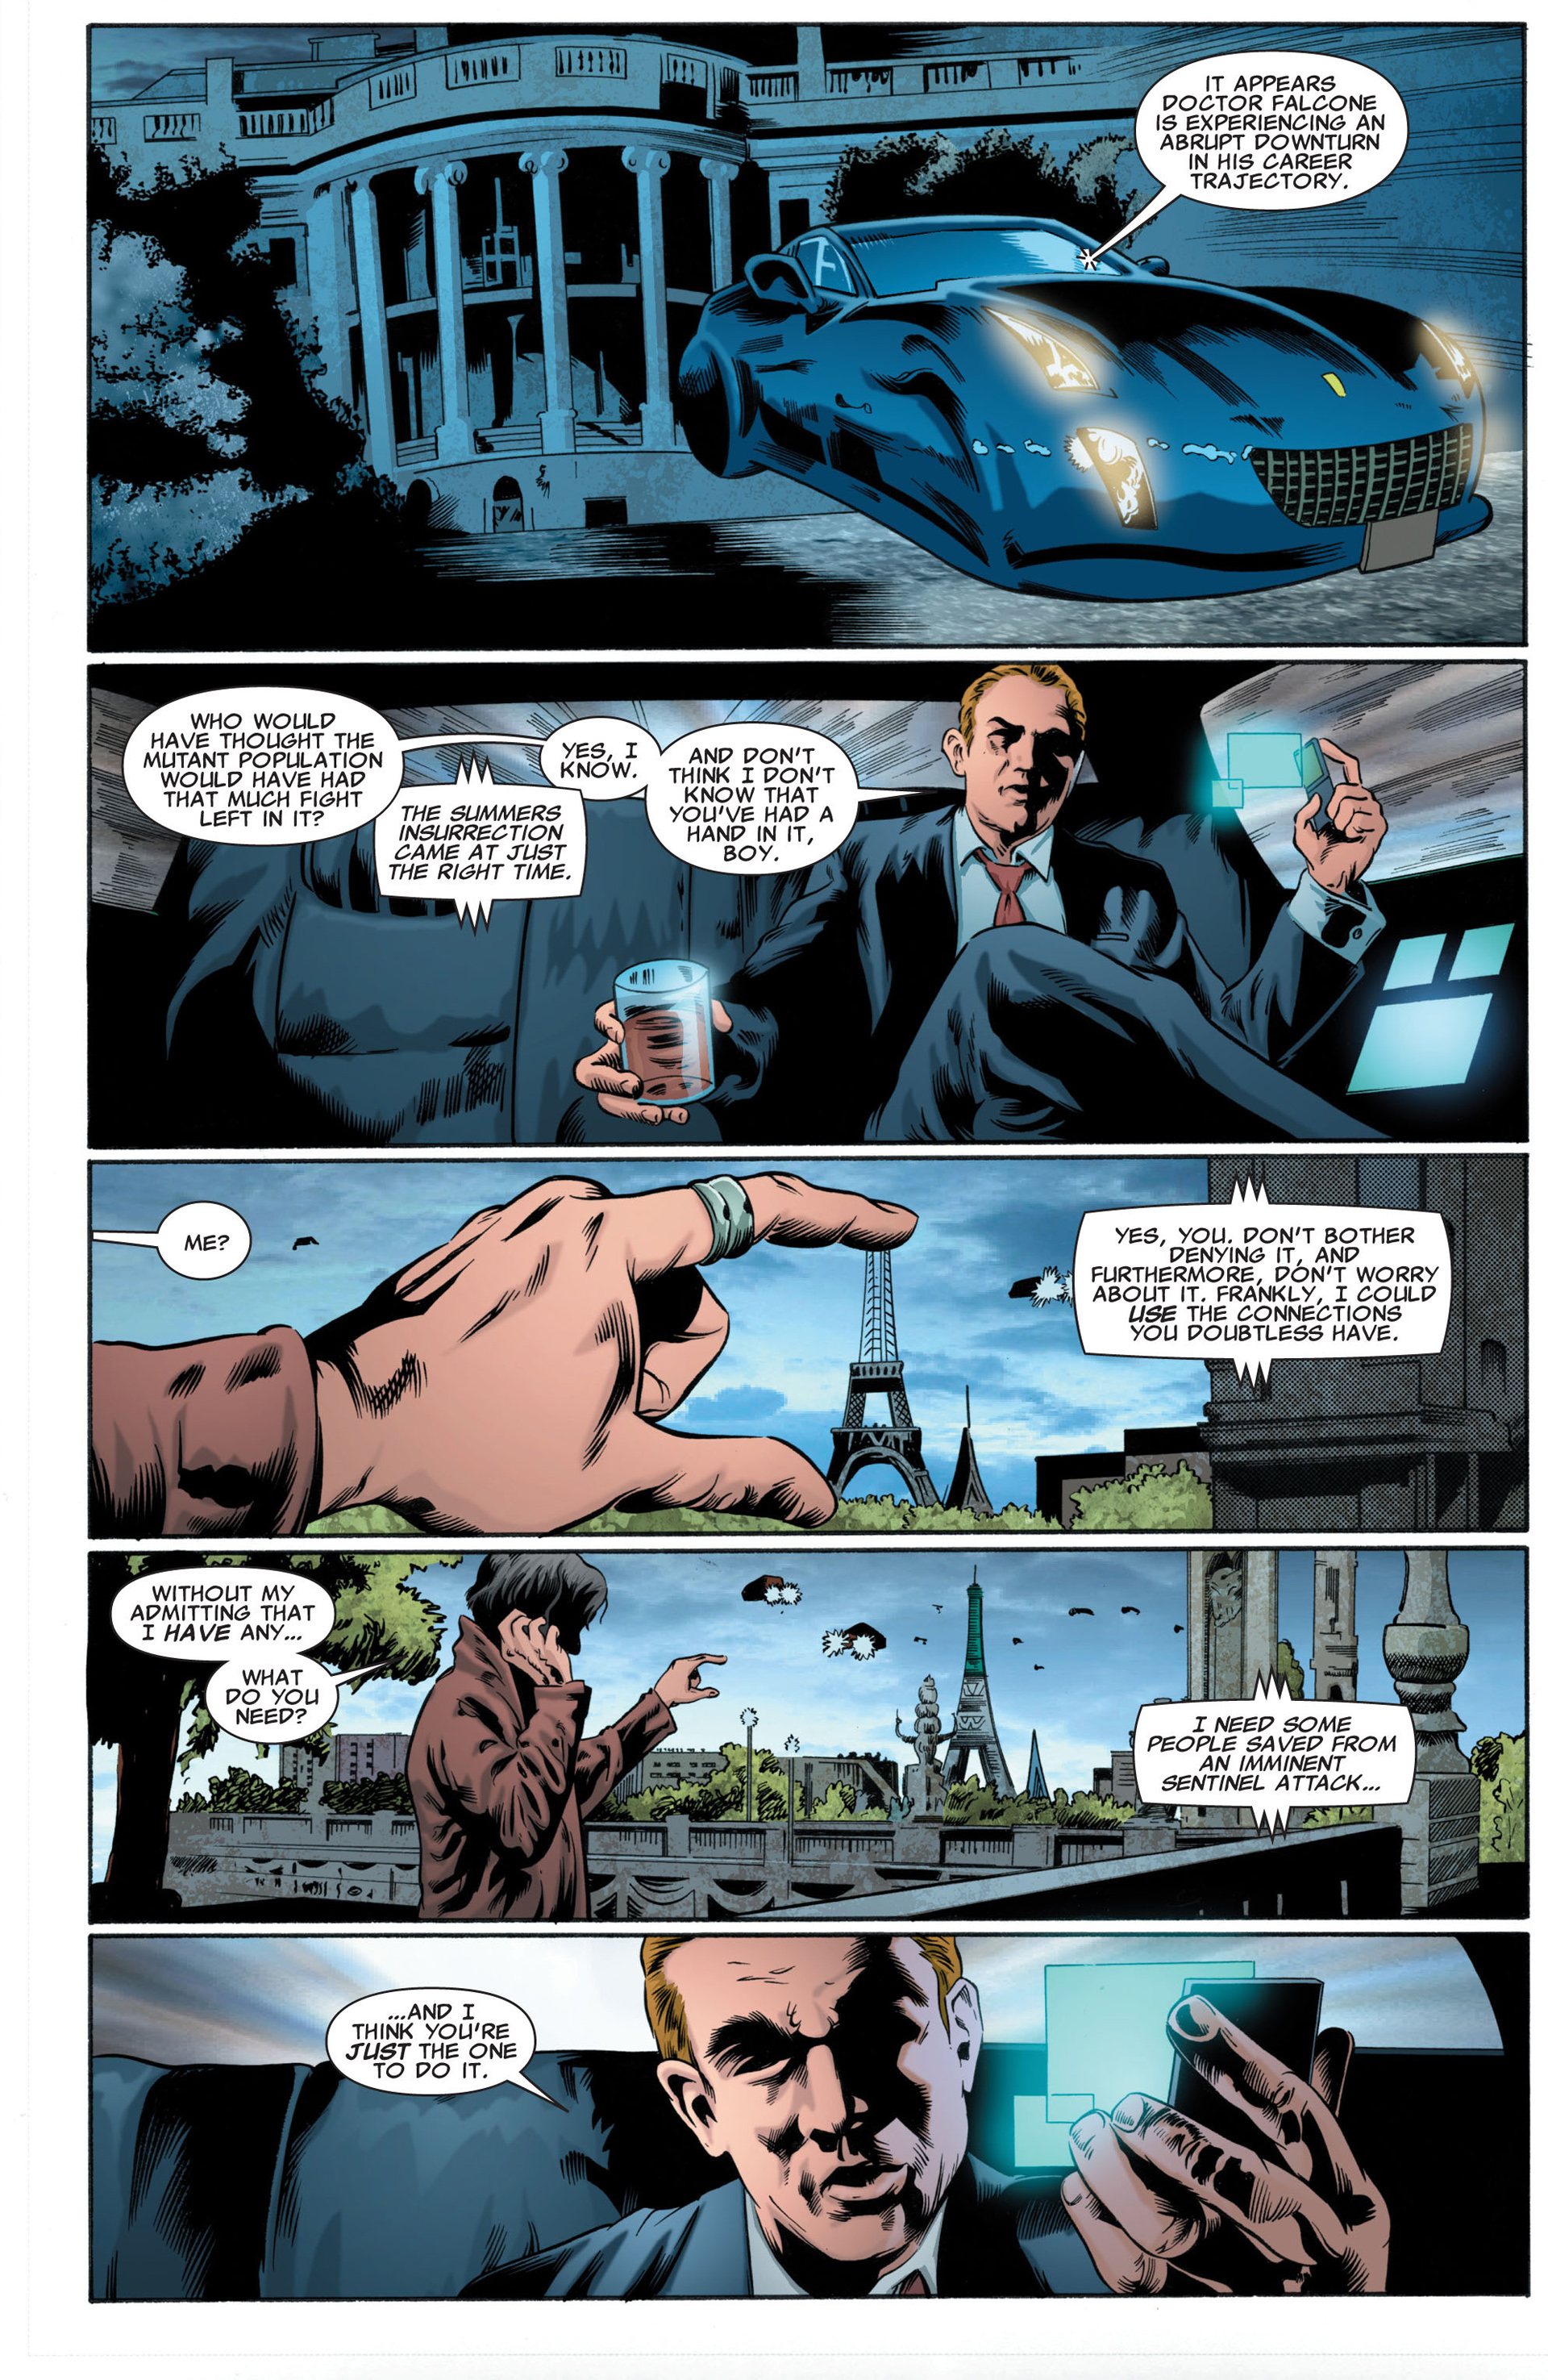 X-Factor (2006) 46 Page 6